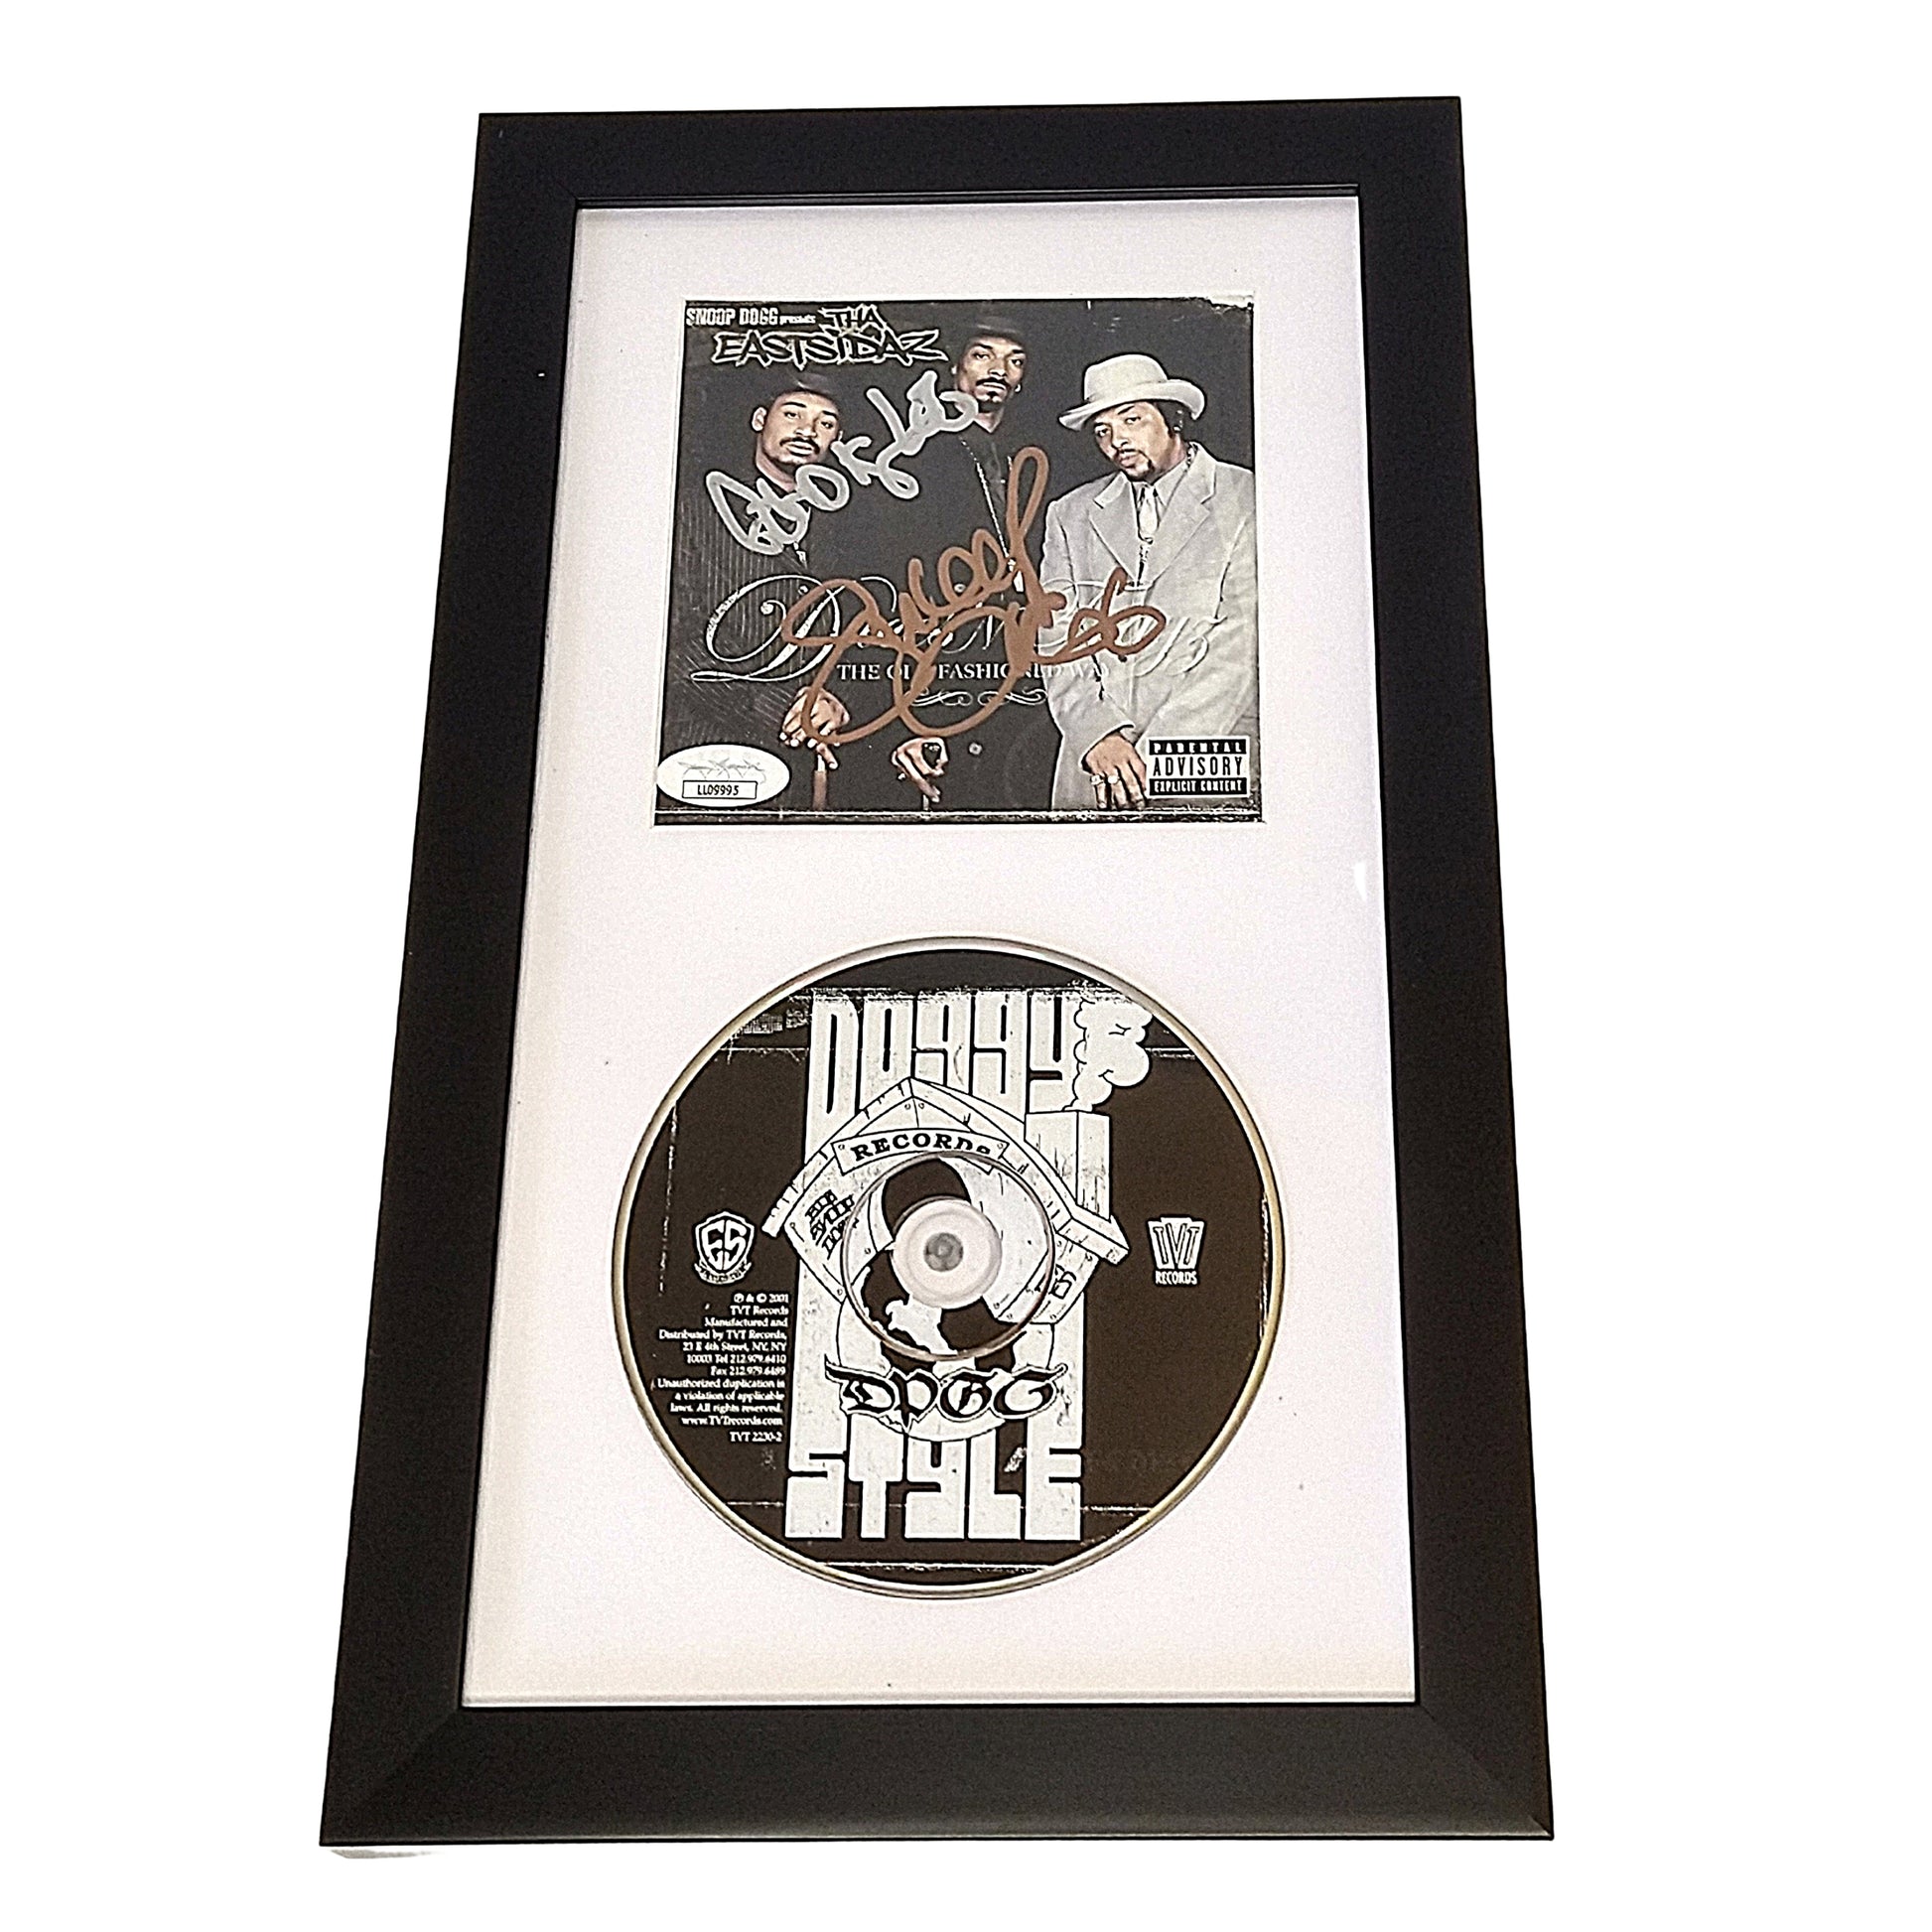 Music- Autographed- Snoop Dogg / Goldie Loc Signed Eastsidaz The Old Fashioned Way CD Cover Booklet Framed with Compact Disc- Snoop Doggy Dogg- 213- James Spence Authentication JSA 104